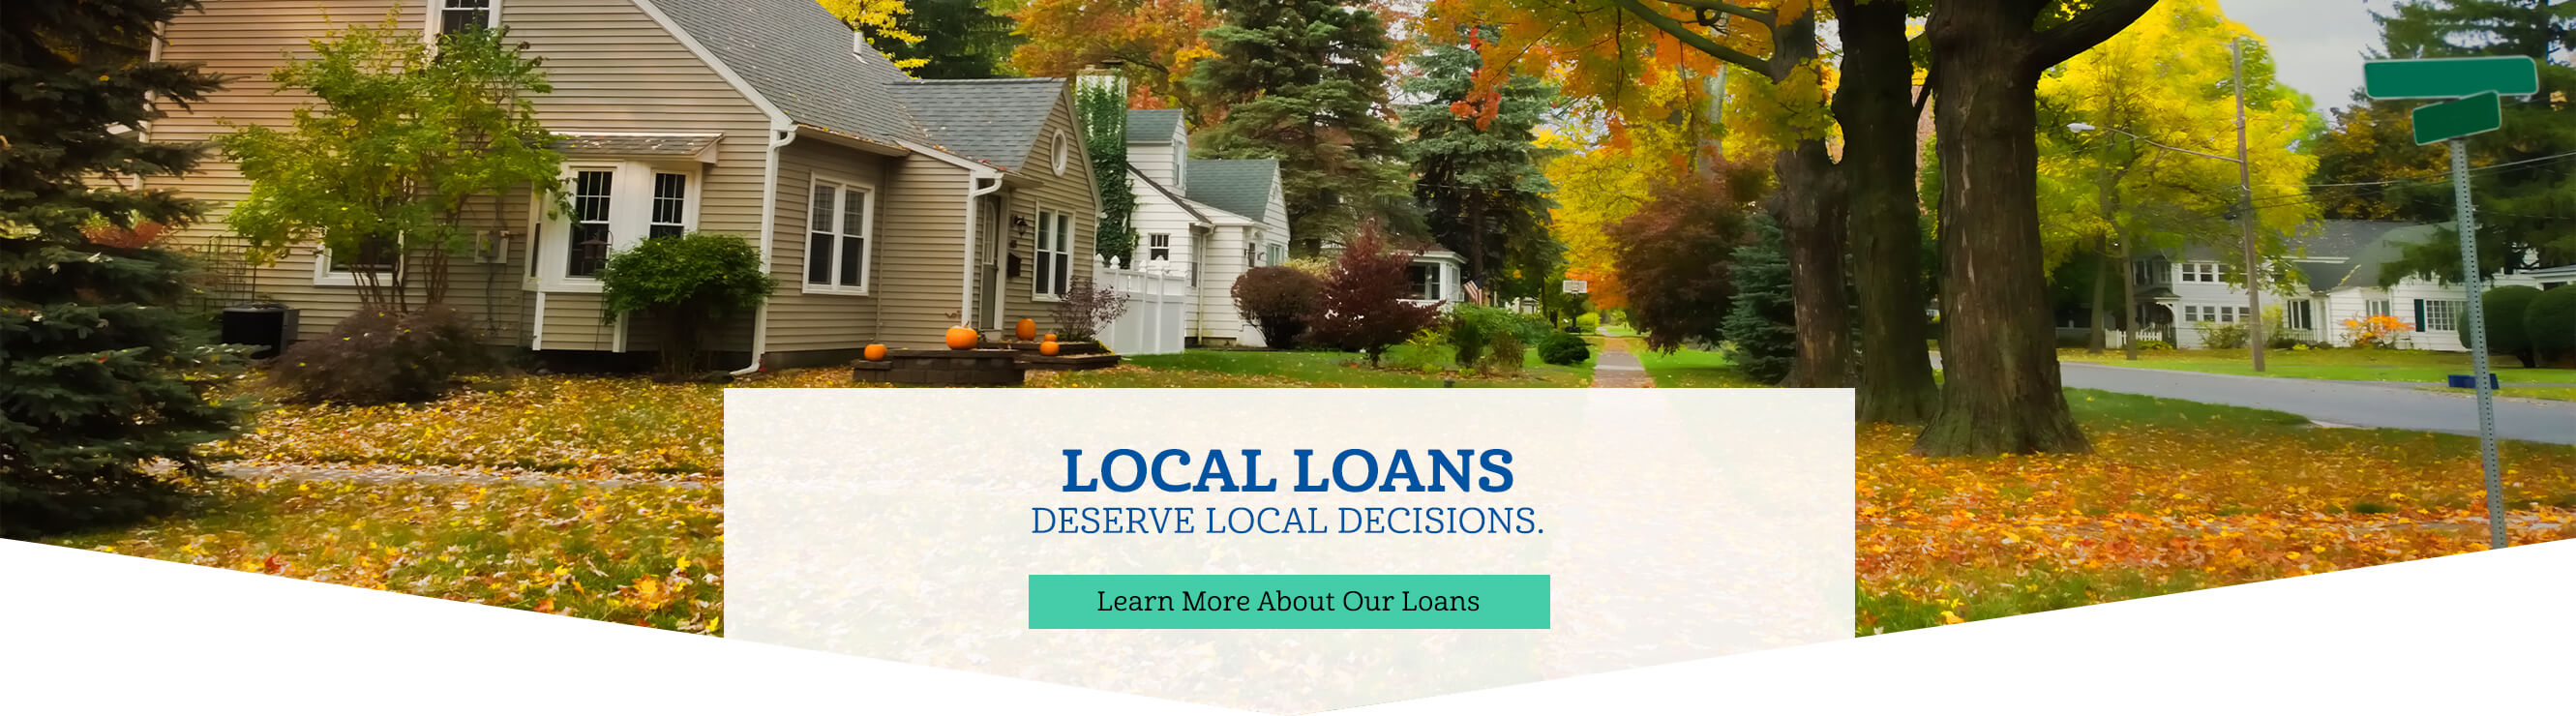 Local Loans Deserve Local Decisions. Learn More About Our Loans